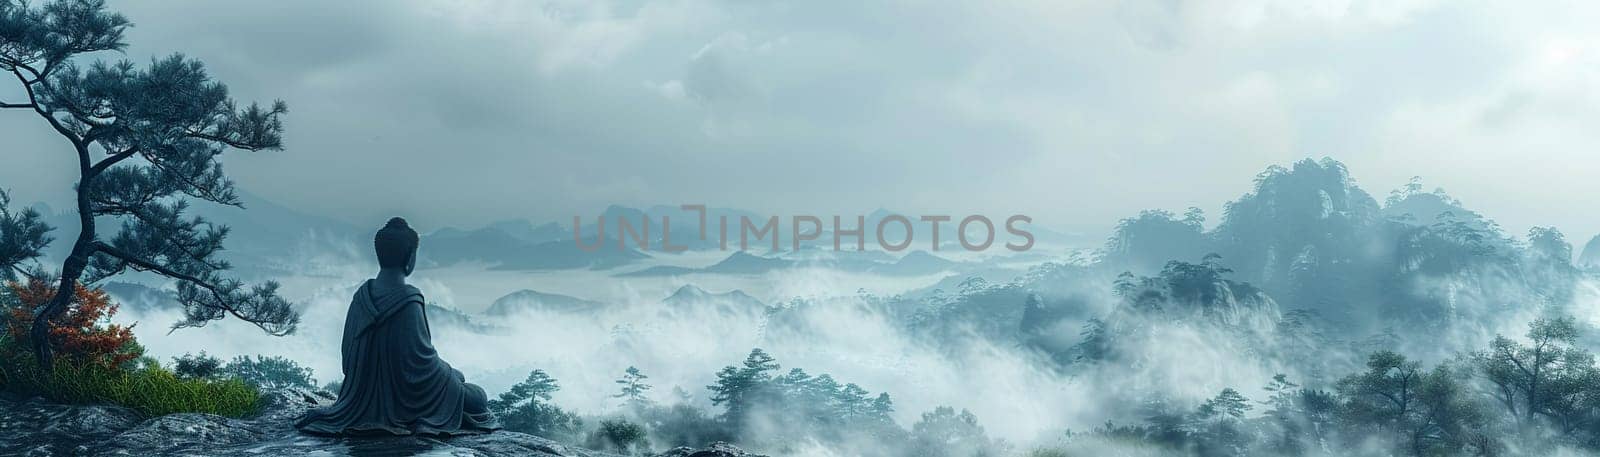 Giant Buddha Statue Overlooking a Misty Landscape, The majestic figure merges with the fog, a sentinel of peace and enlightenment.